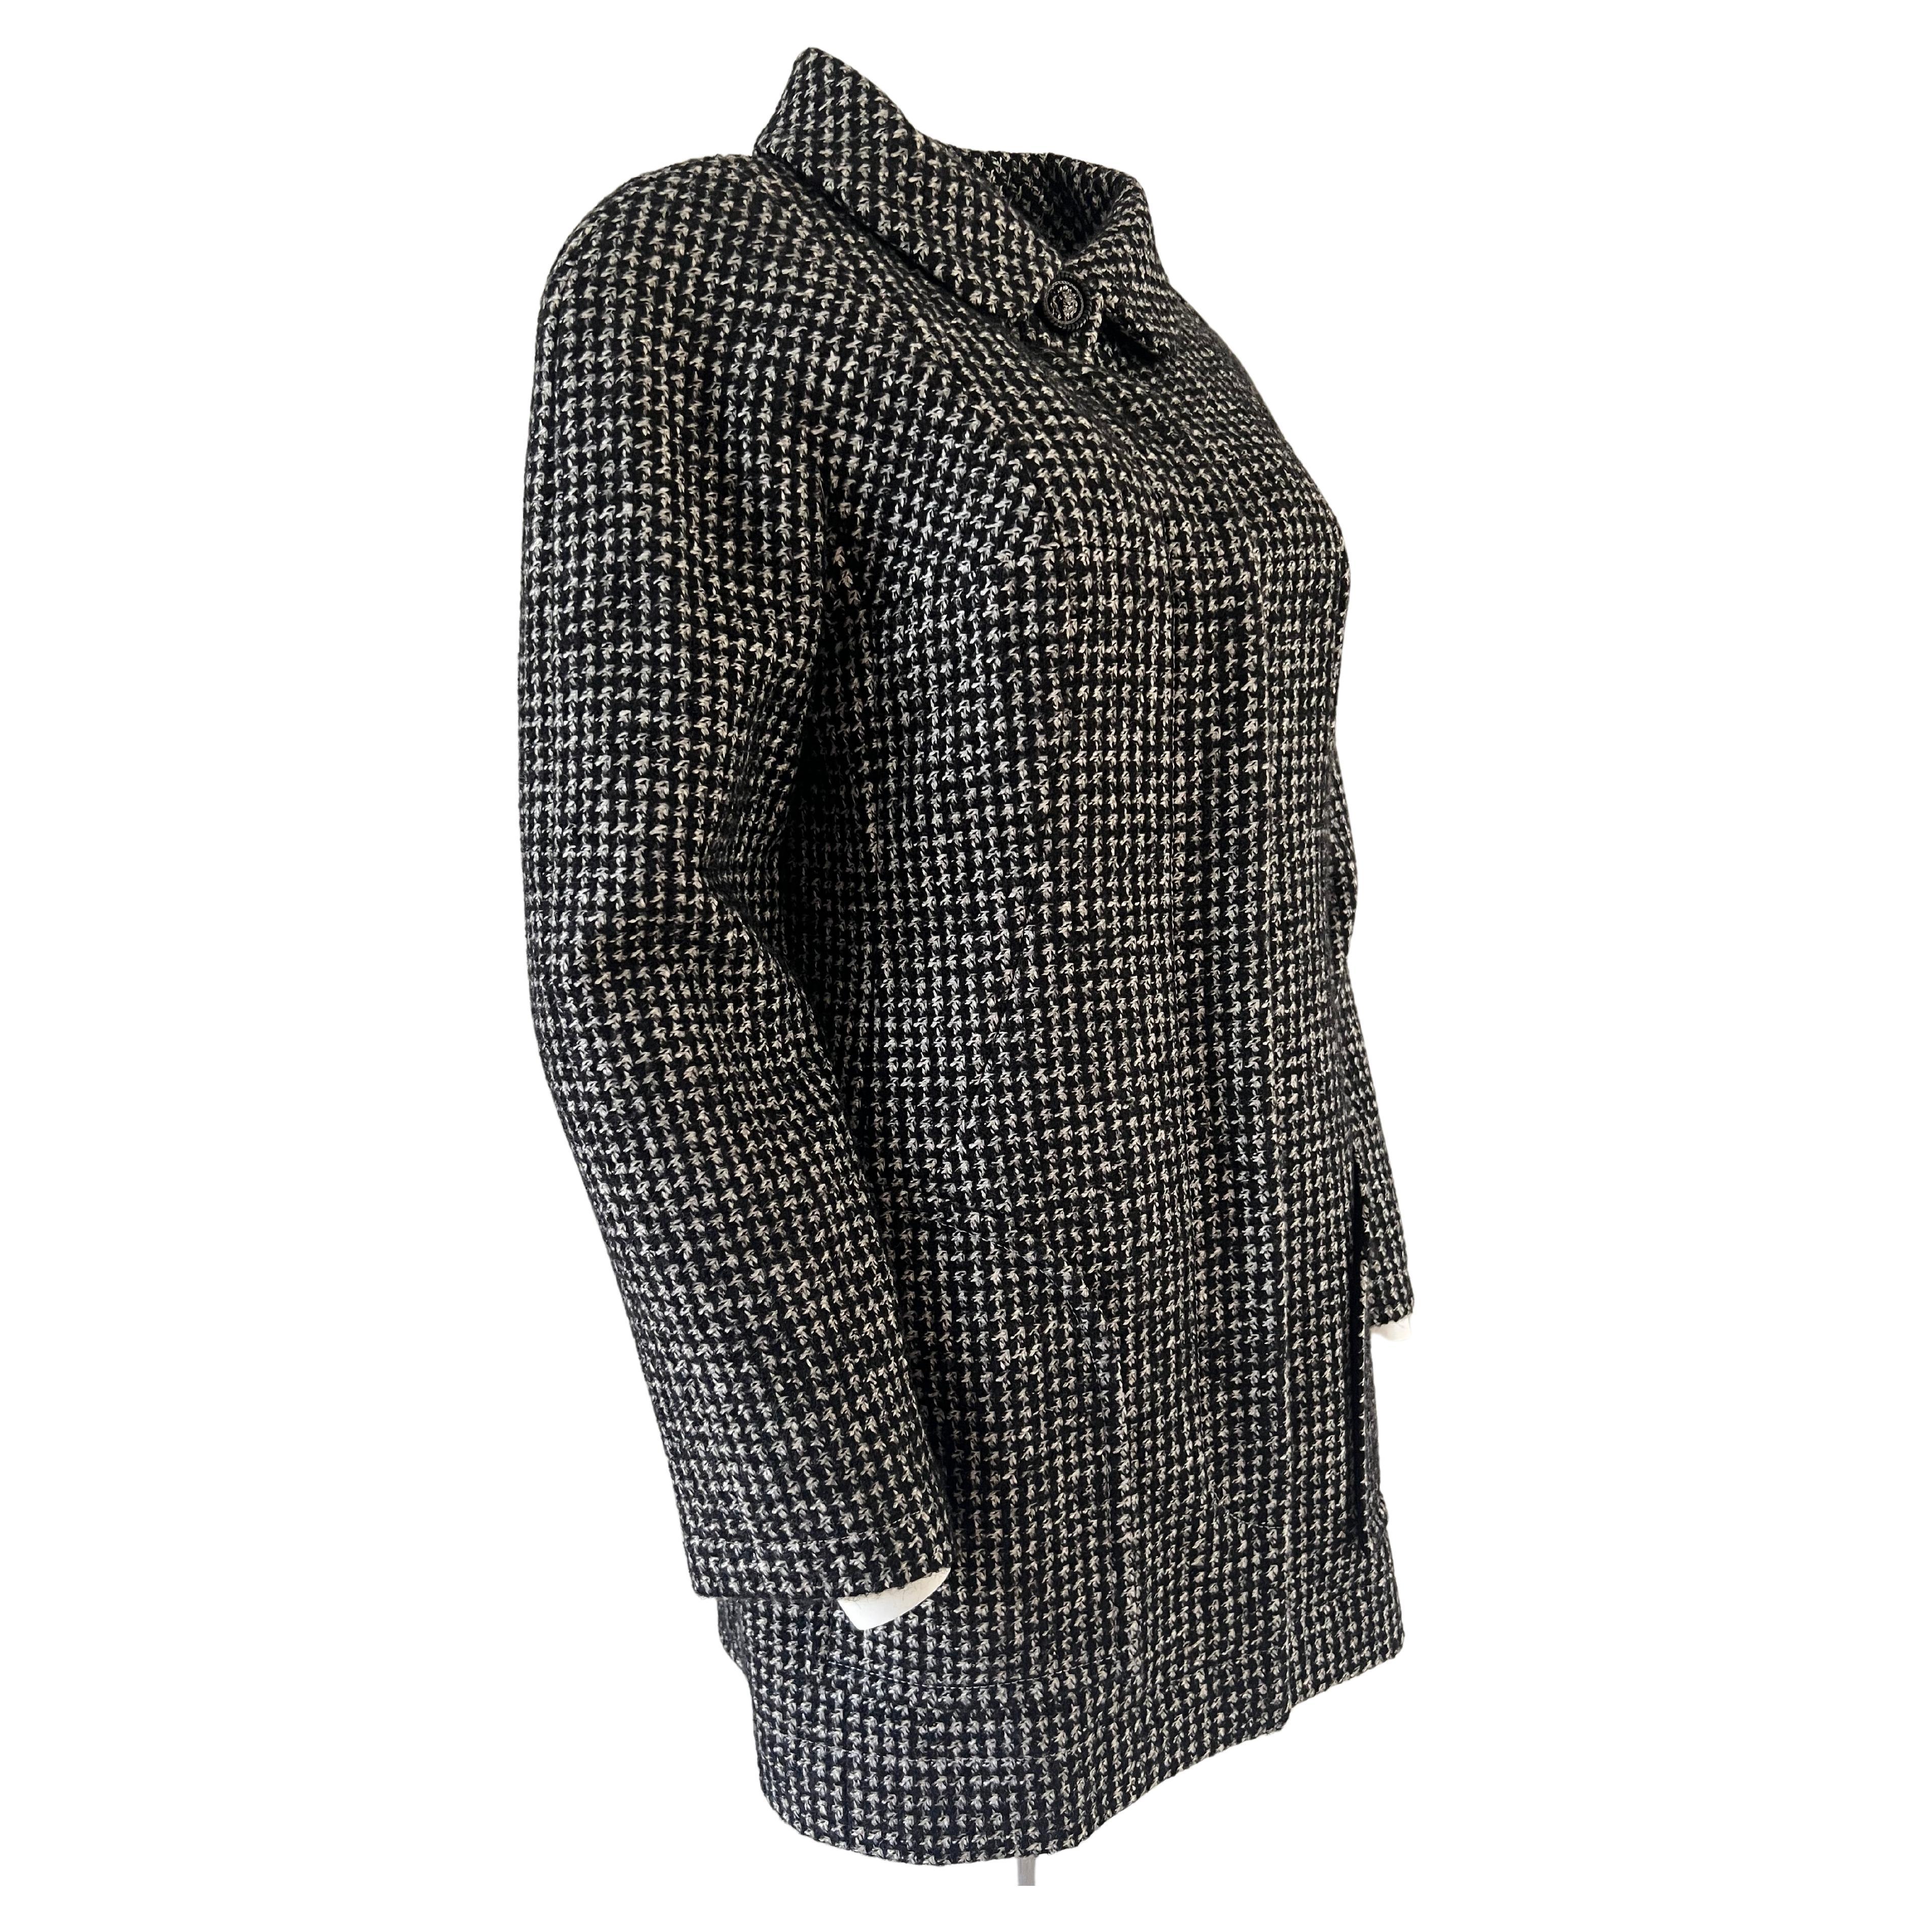 Chanel long jacket in black and white hounds-tooth tweed. Open round neck.
Two large pockets on the front of the jacket with an opening at an angle. Seven buttons in black tones bear the image of a lion's mouth. The buttons are hidden when the